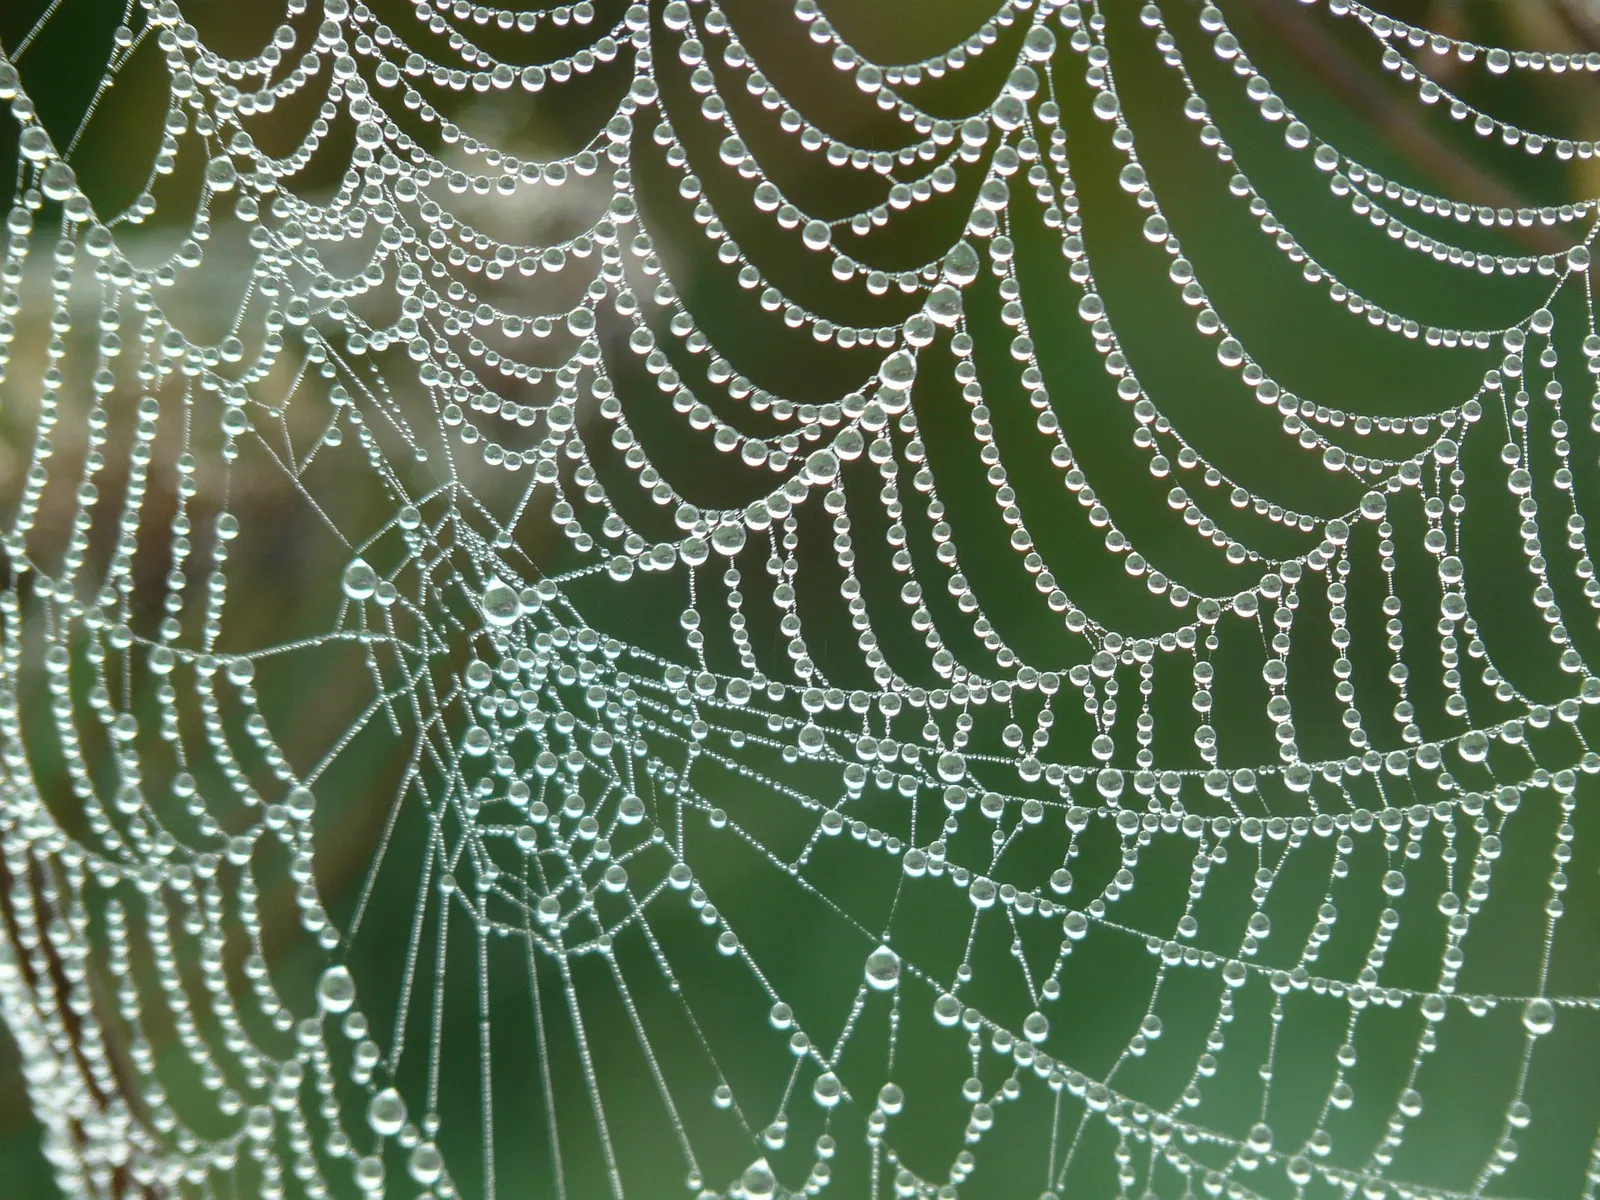 Spiderwebs and spider silk, explained